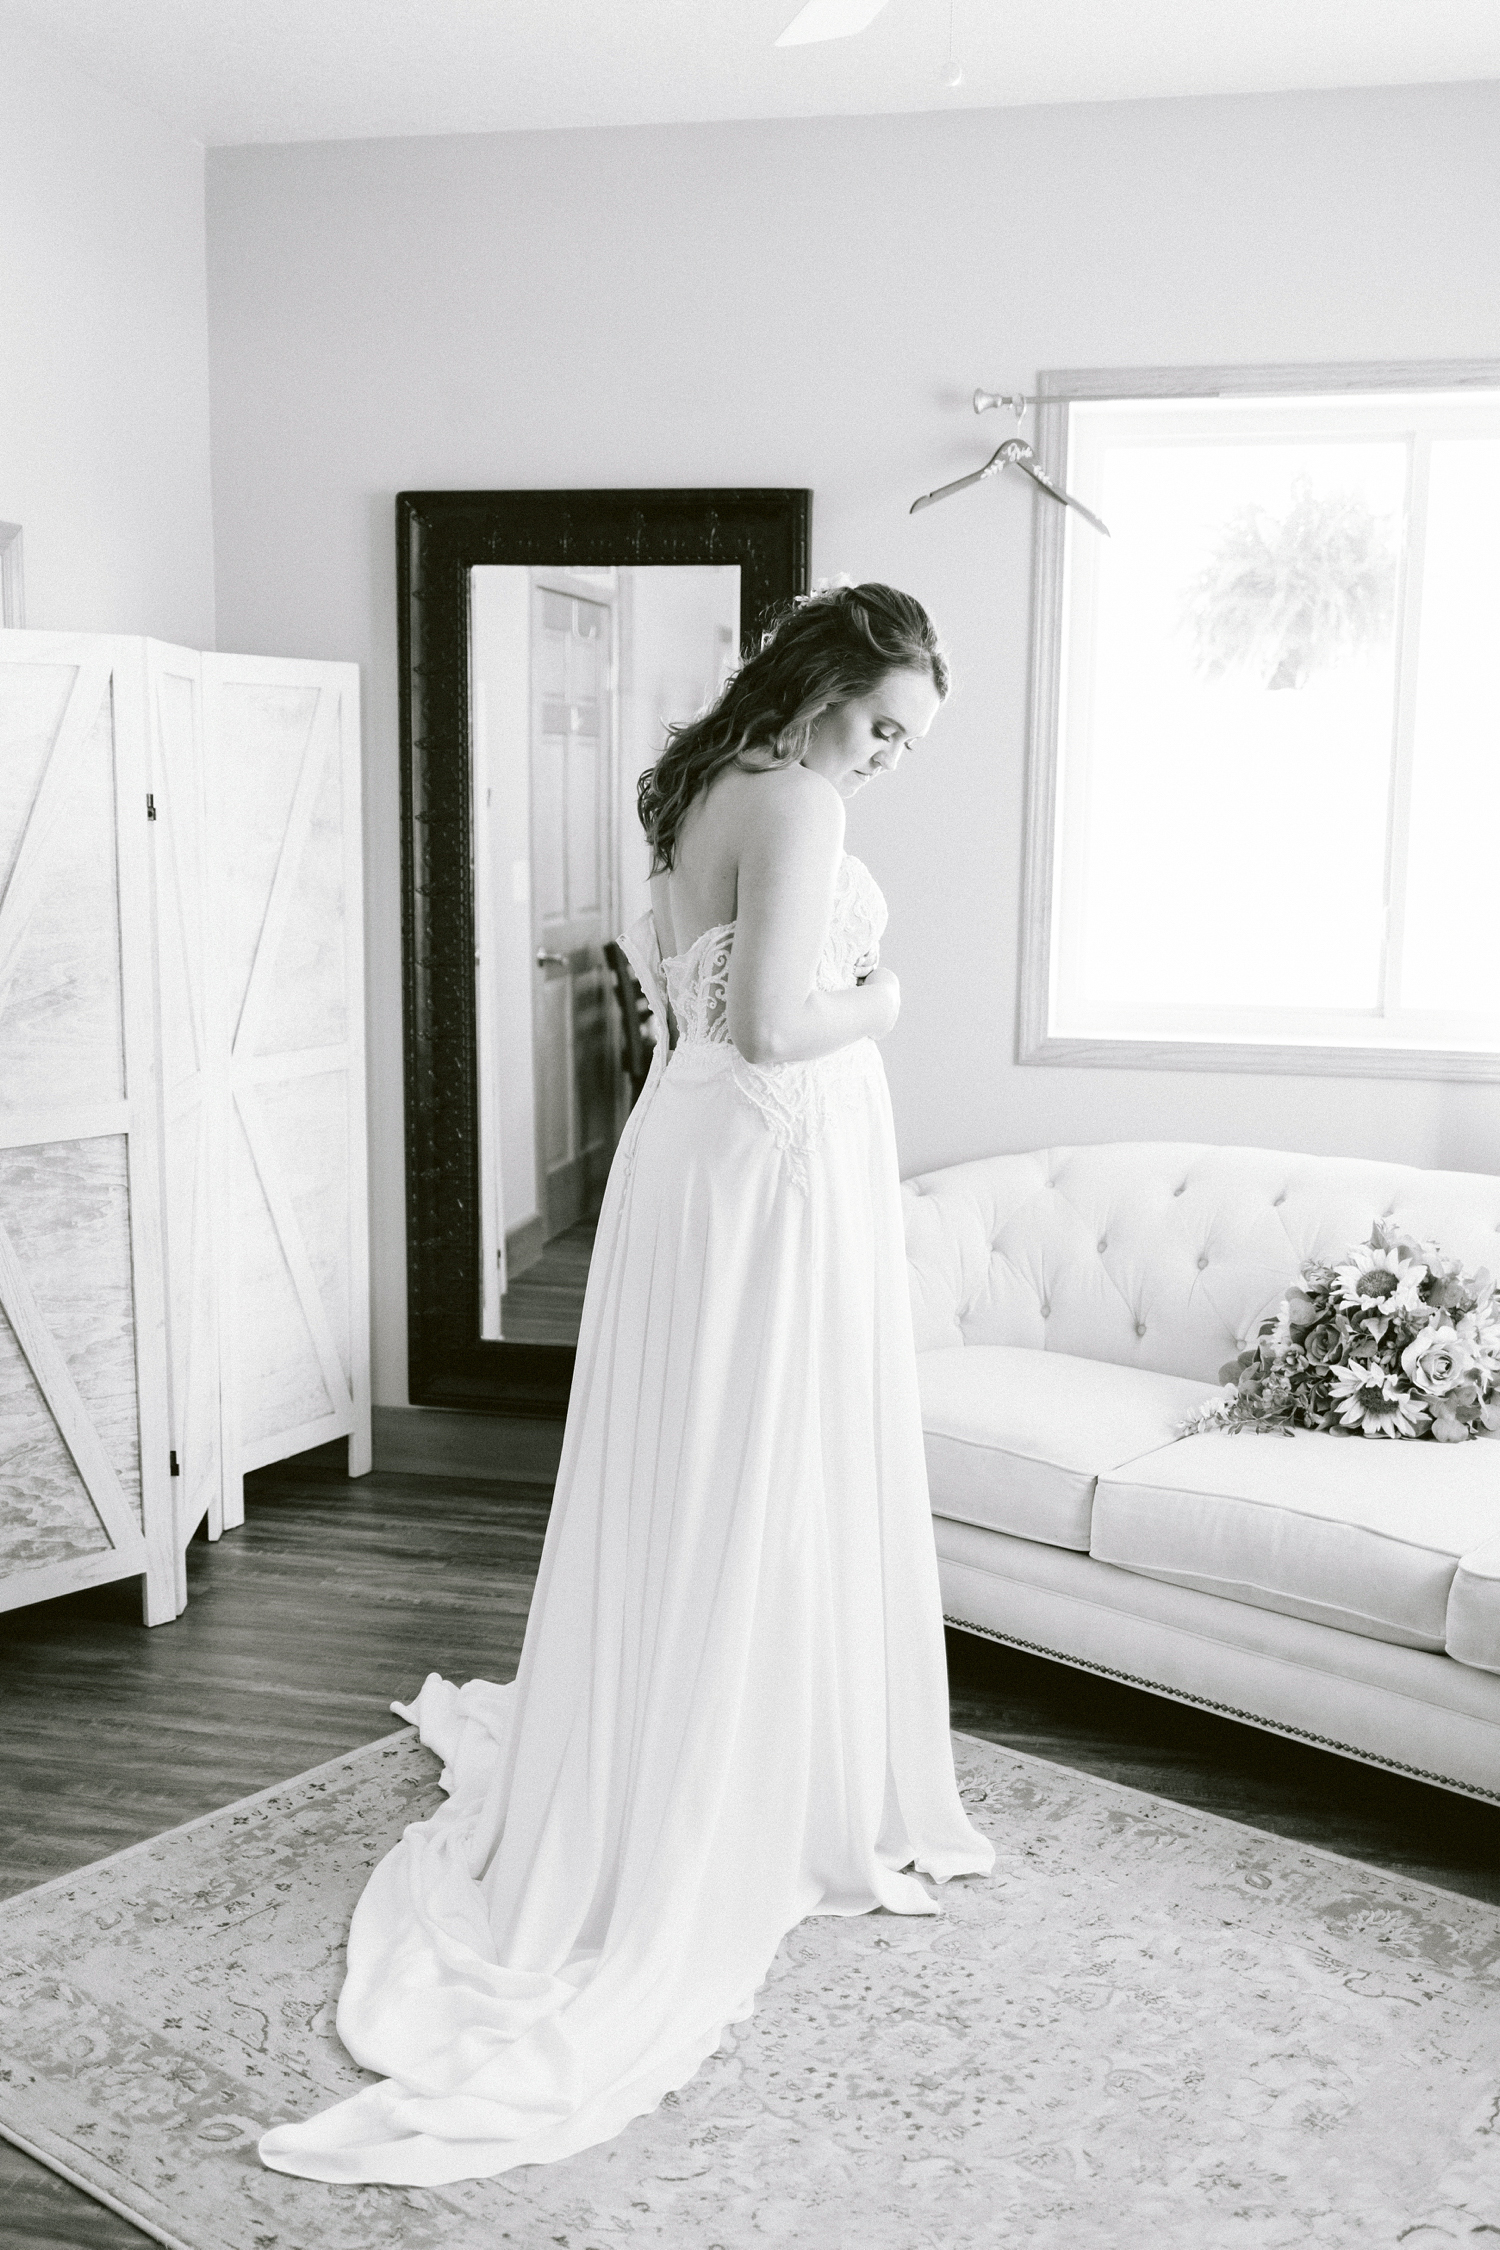 Megan looks down at her wedding gown as she dresses in the bridal suite at Countryside Wedding and Events in Knoxville, IA | A rustic, country wedding with western touches | CB Studio